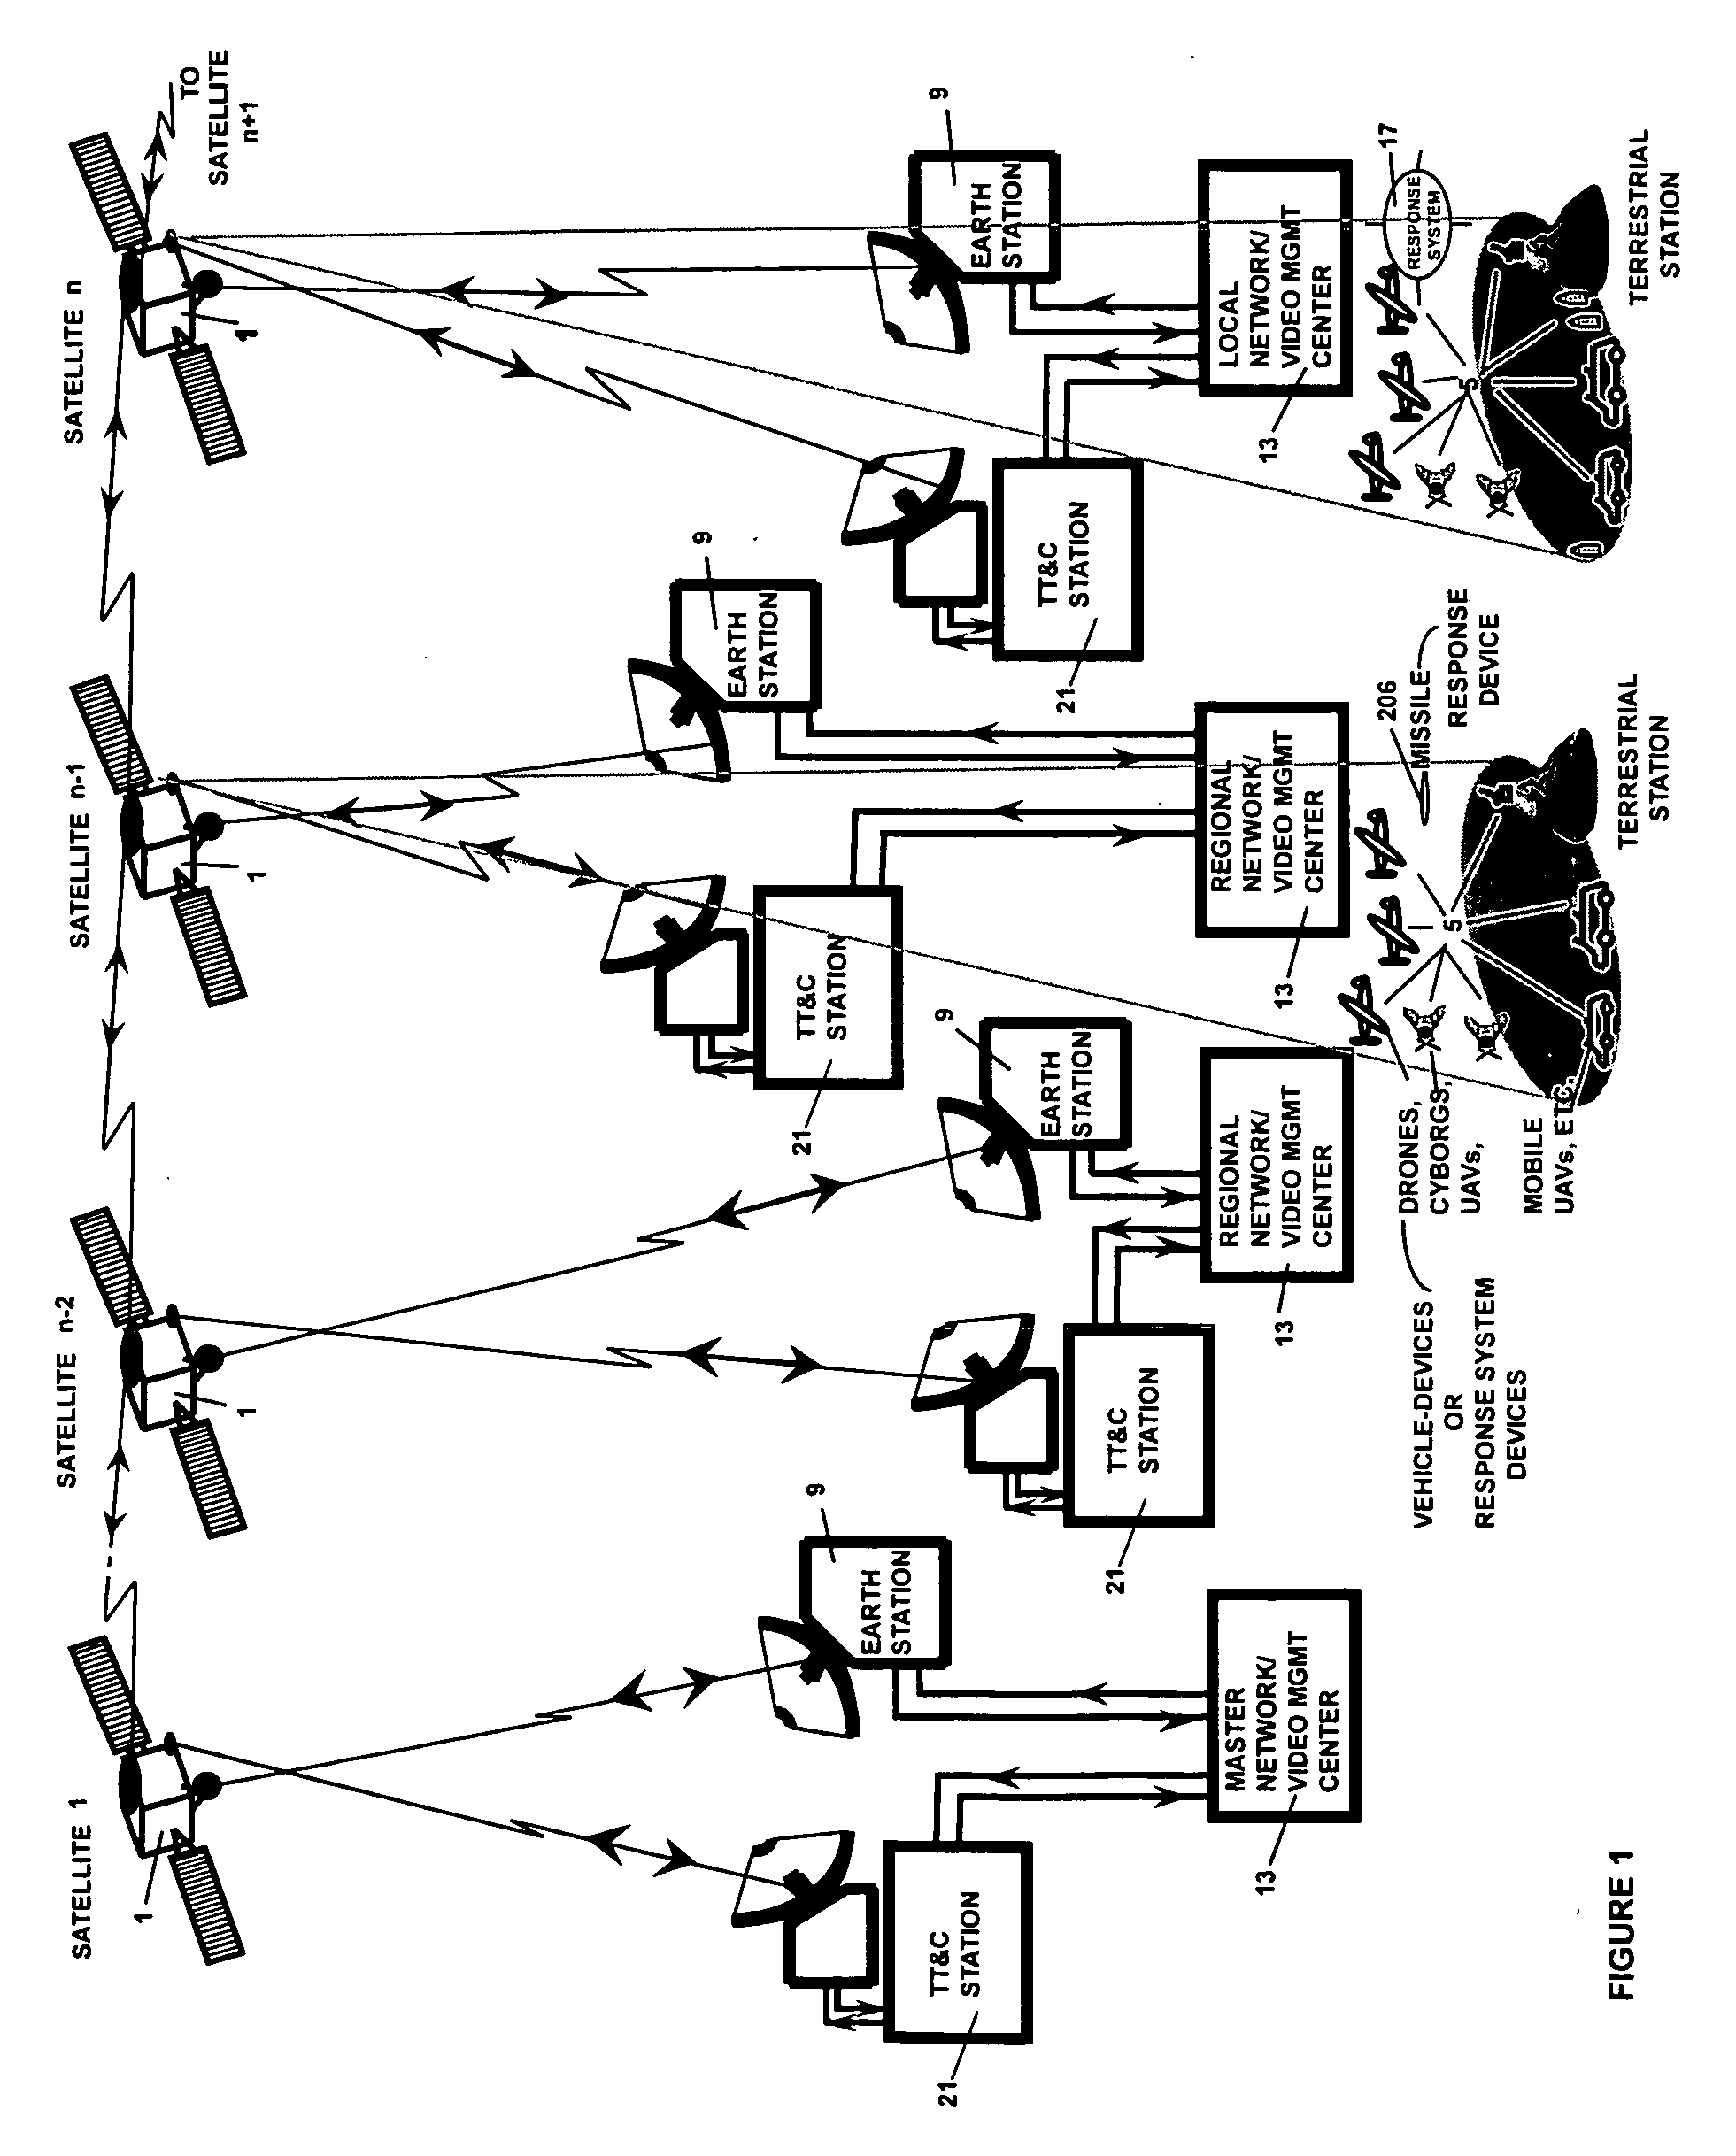 System and Method for Satellite Enhanced Command, Control, and Surveillance Services Between Network Management Centers and Unmanned Land and Aerial Devices